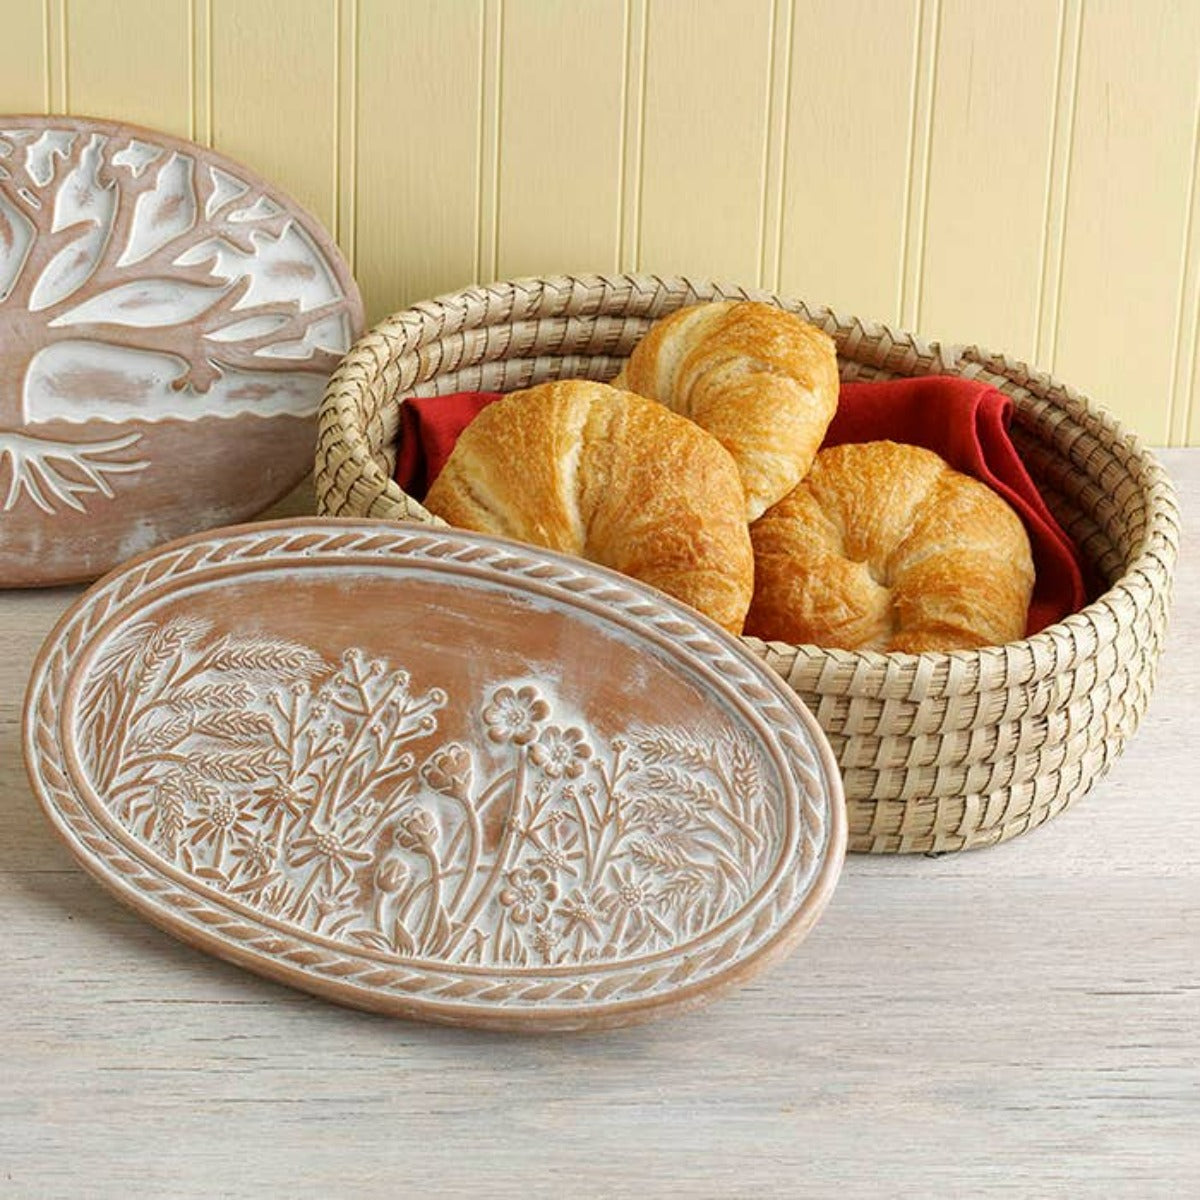 Fair Fields Bread Warmer- Perfect gift for the bread lover